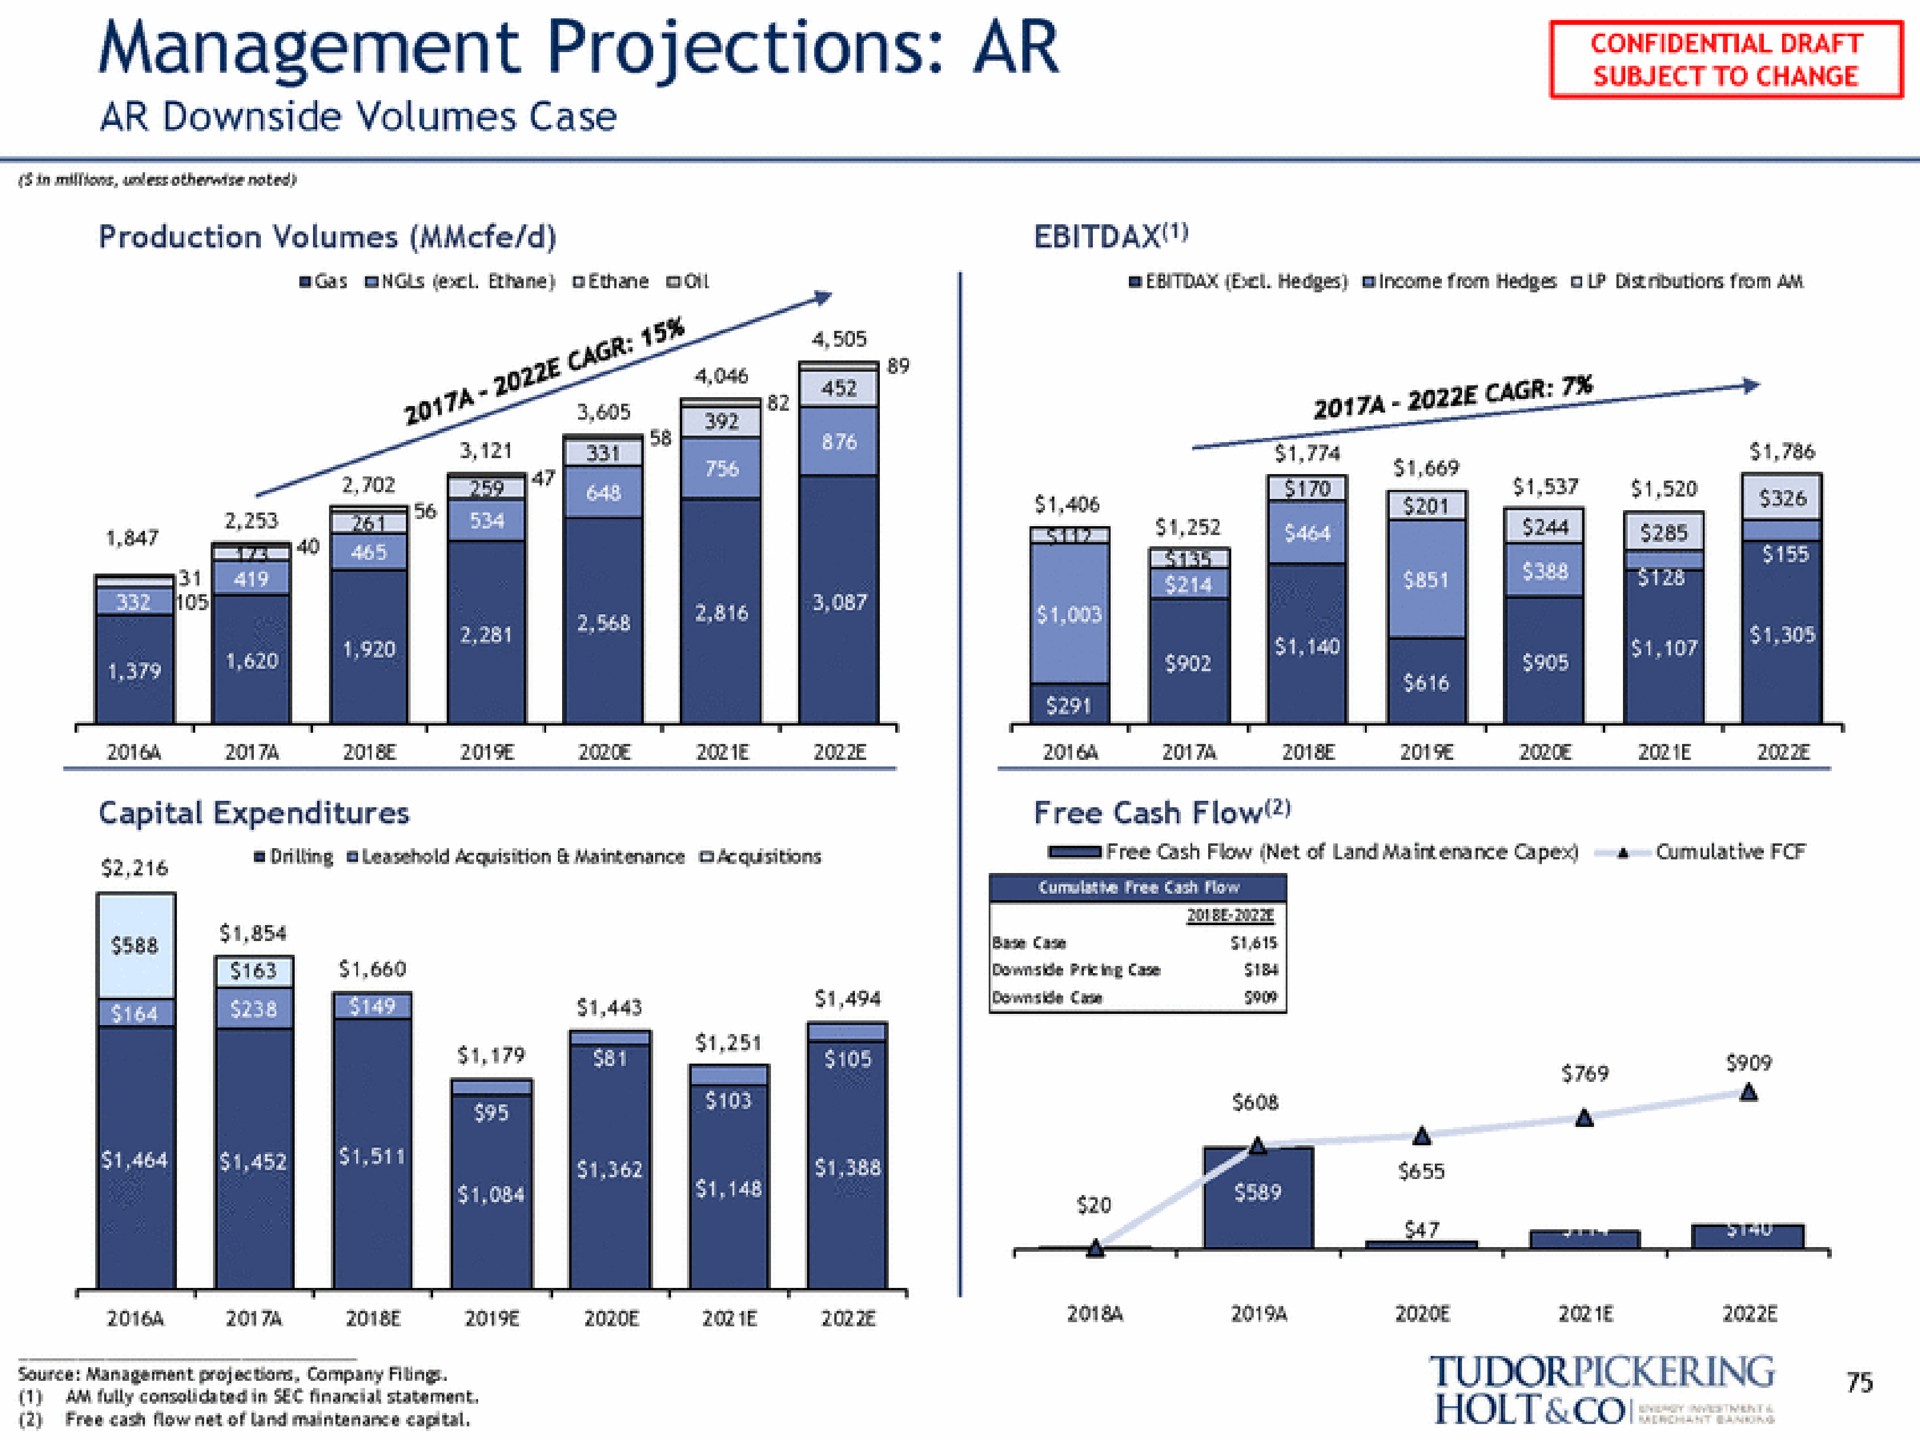 management projections subject to change | Tudor, Pickering, Holt & Co